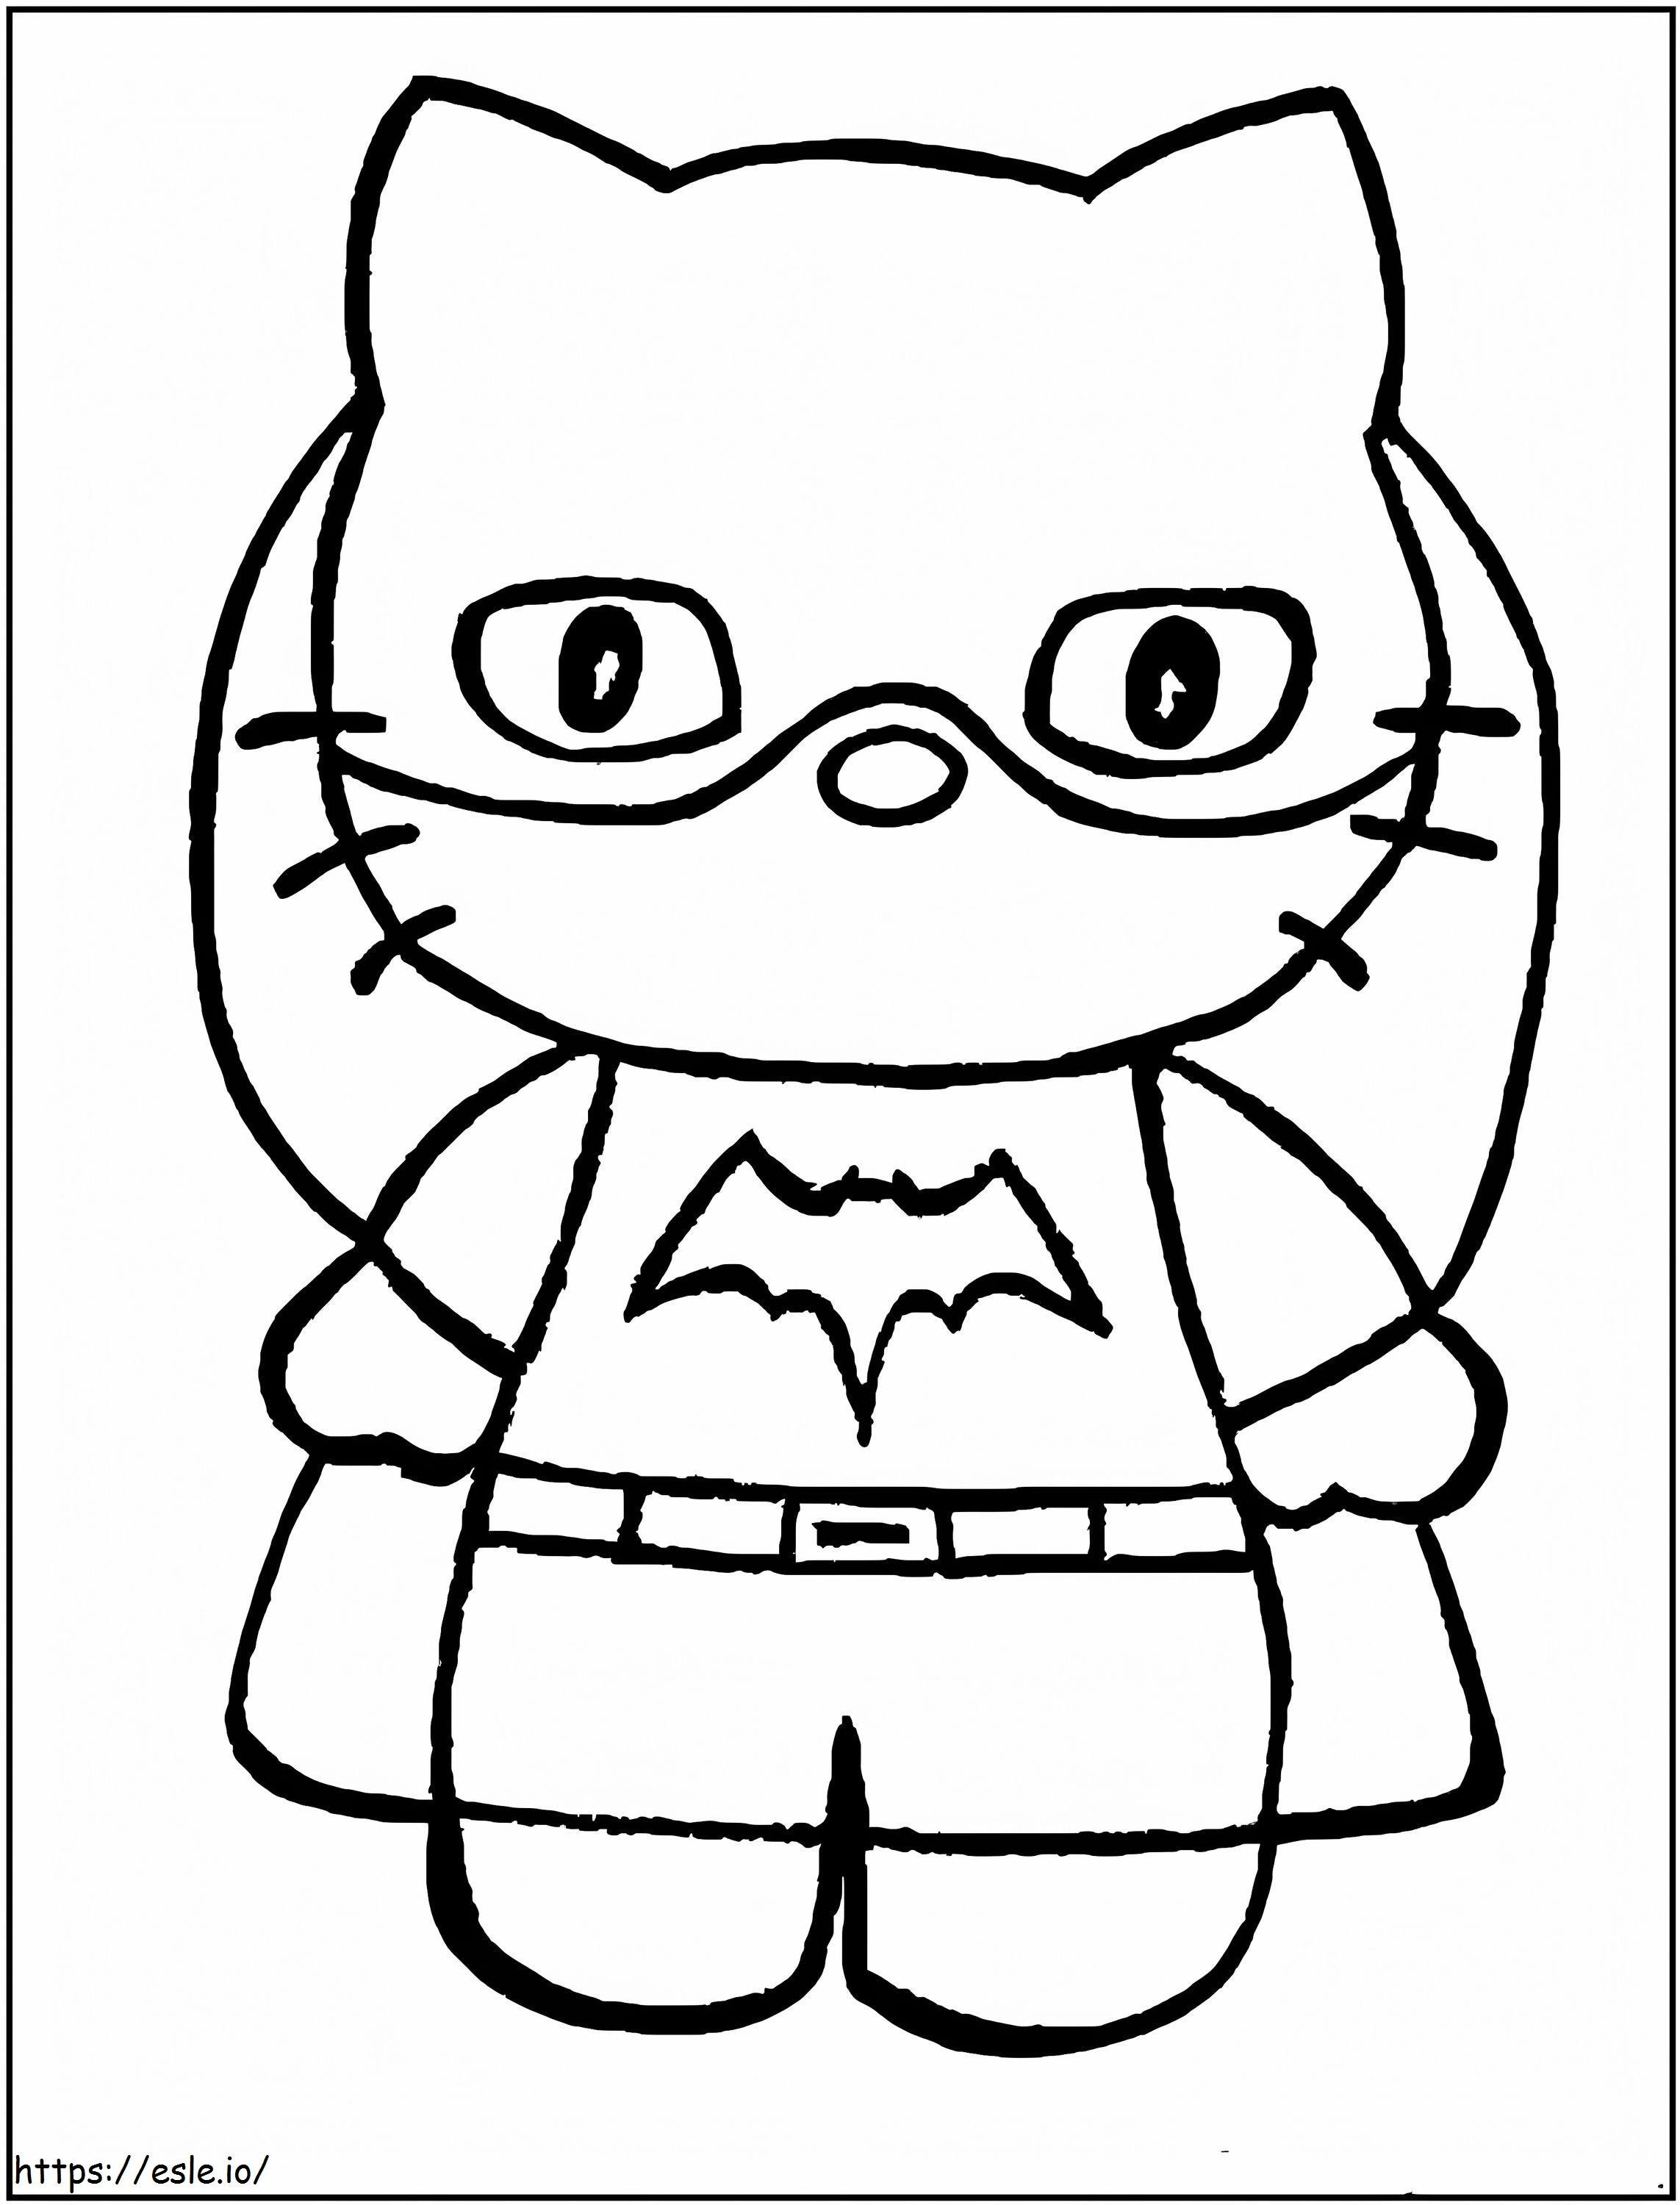 Hello Kitty Batichica coloring page